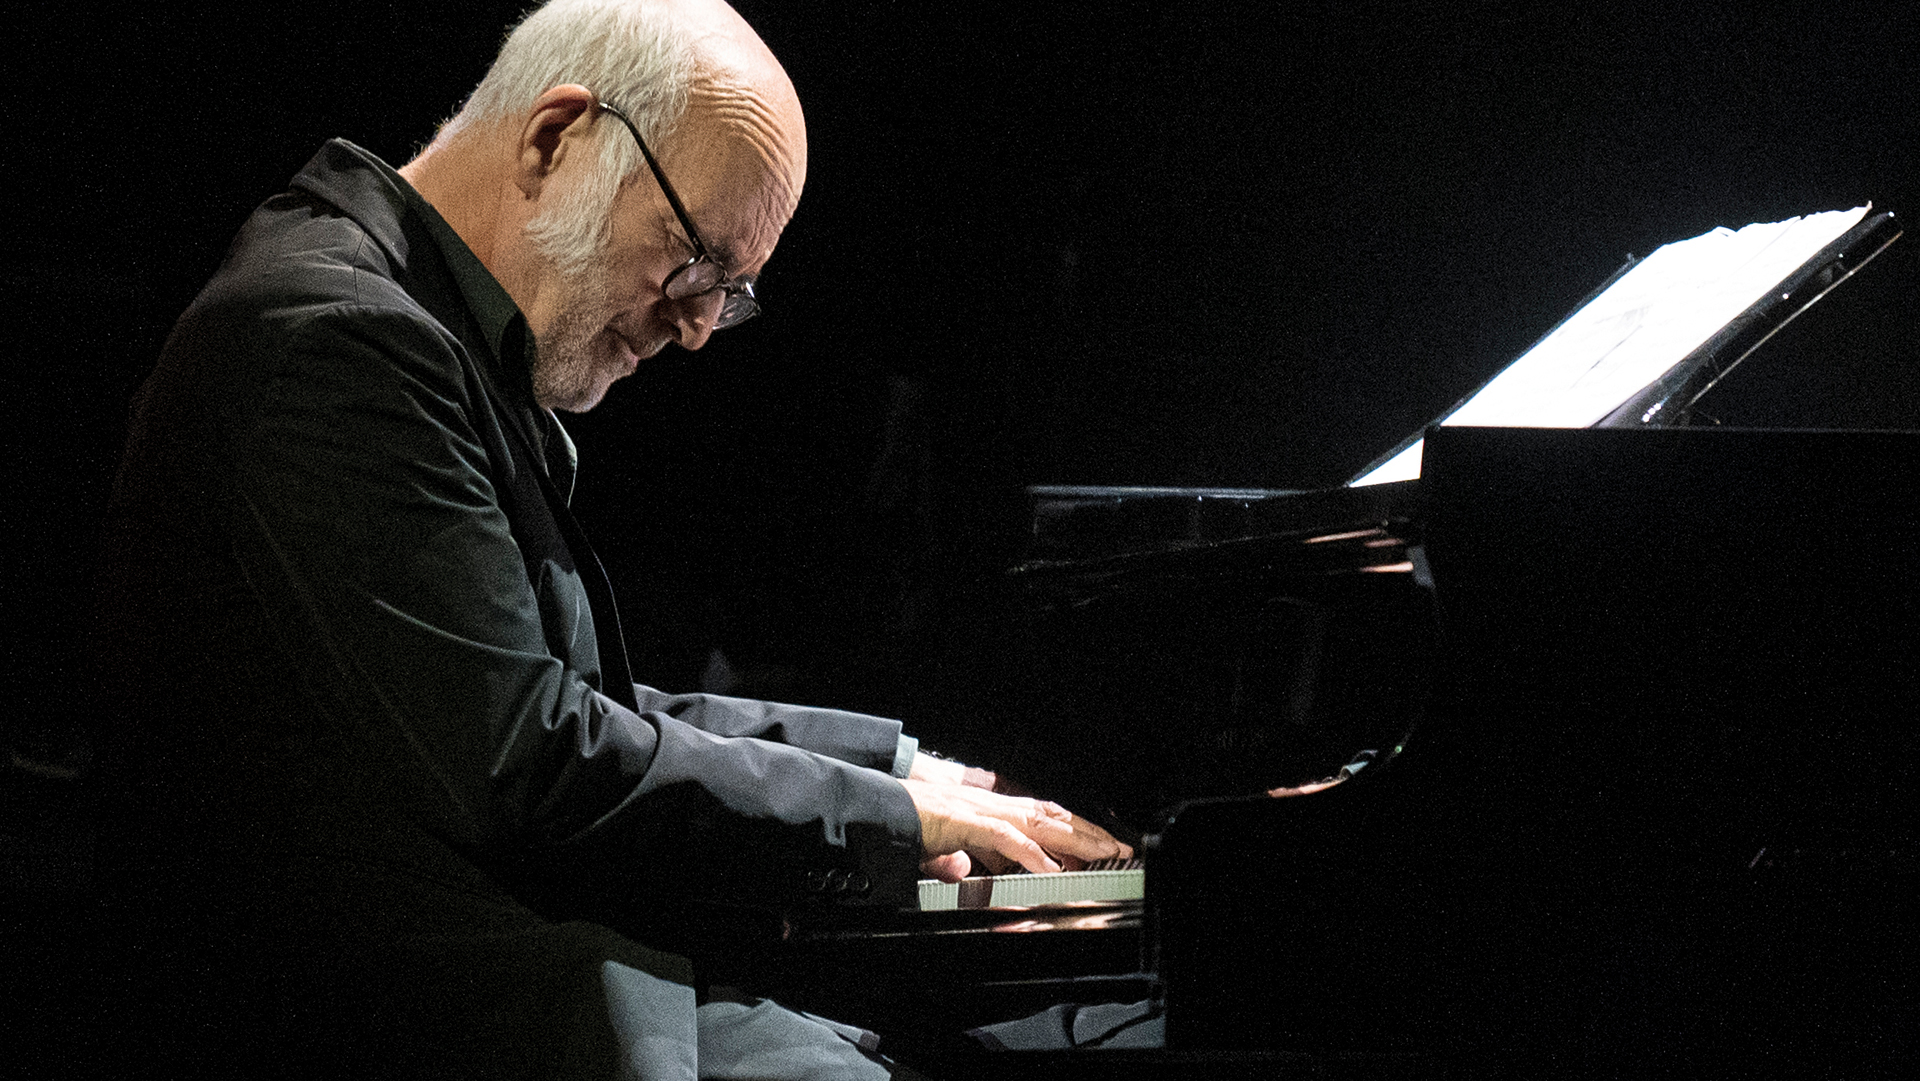 Ludovico Einaudi: A meditative balm to the daily grind - The Big Issue